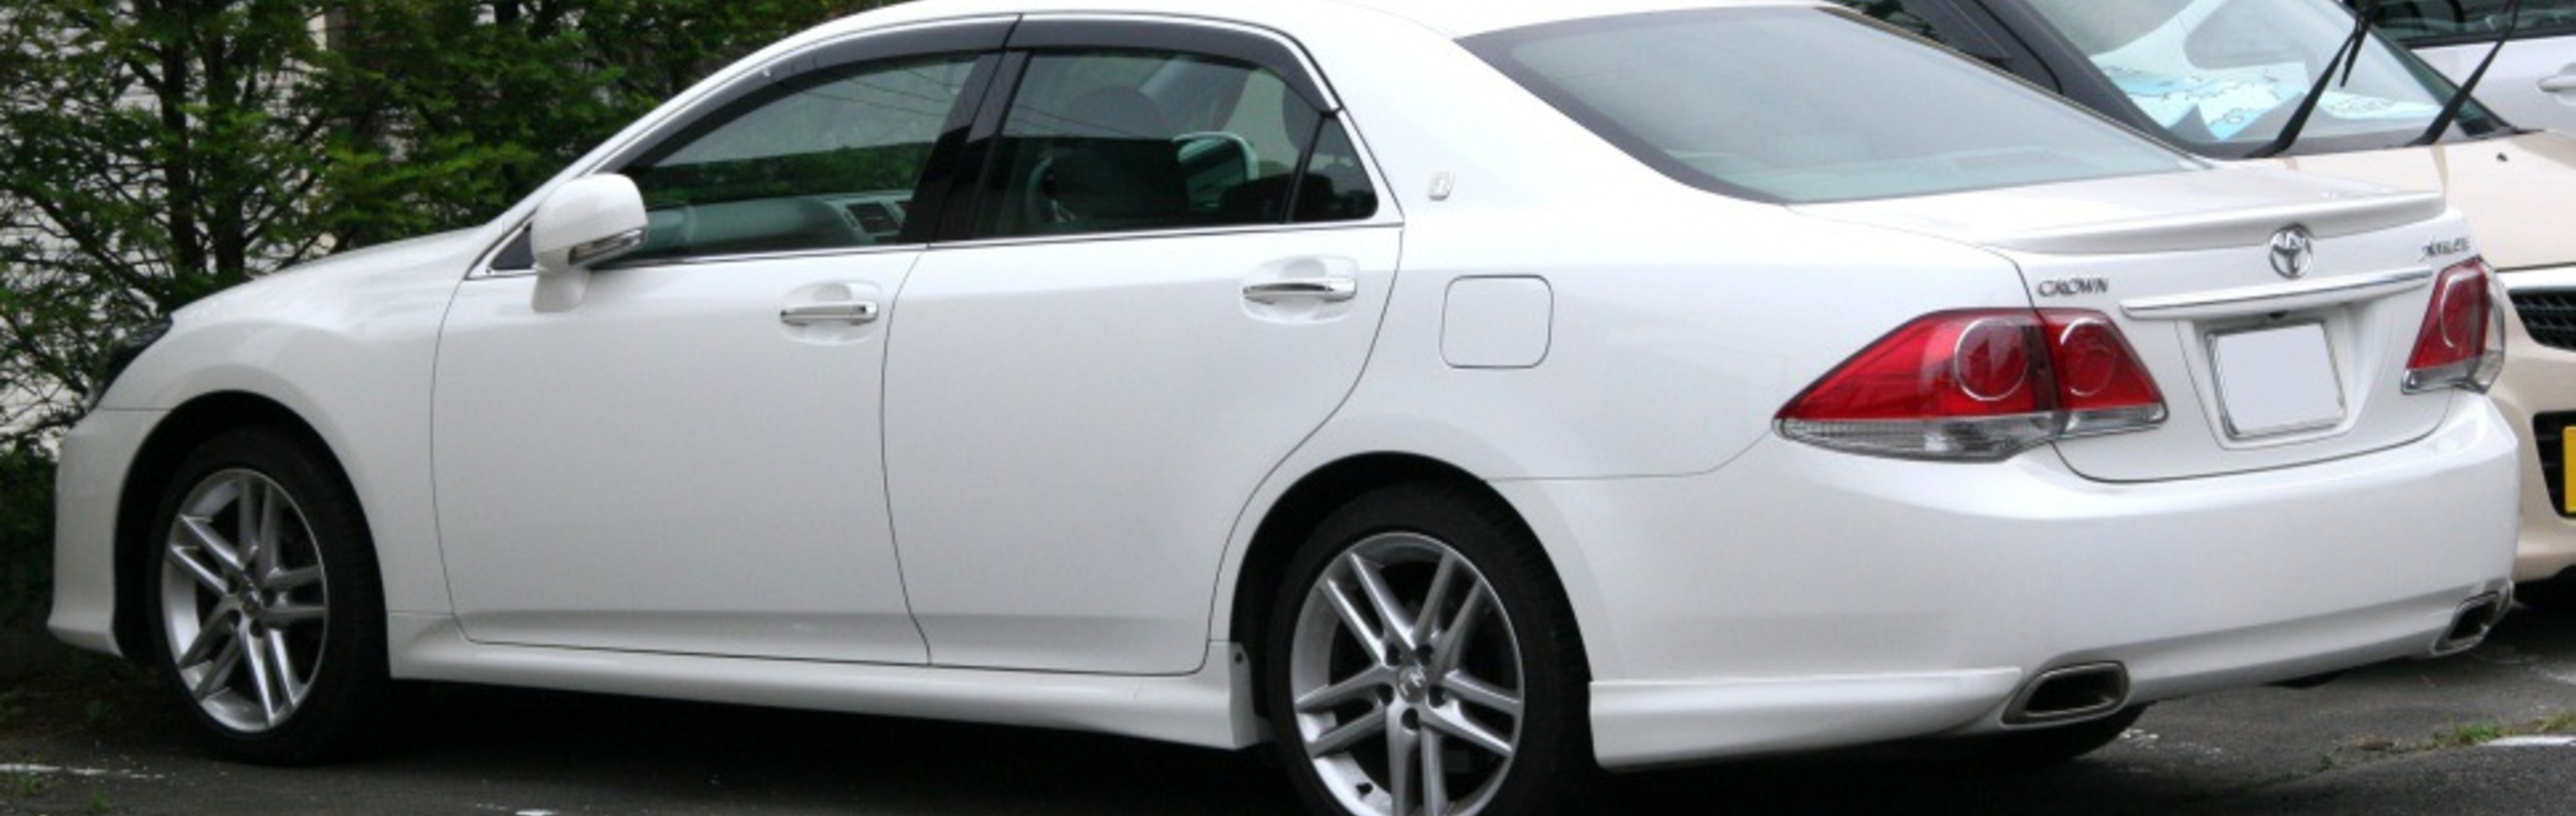 Toyota Crown Athlete XIII (S200, facelift 2010) 2.5 i-Four V6 24V (203 Hp) 4WD Automatic 2010, 2011, 2012 